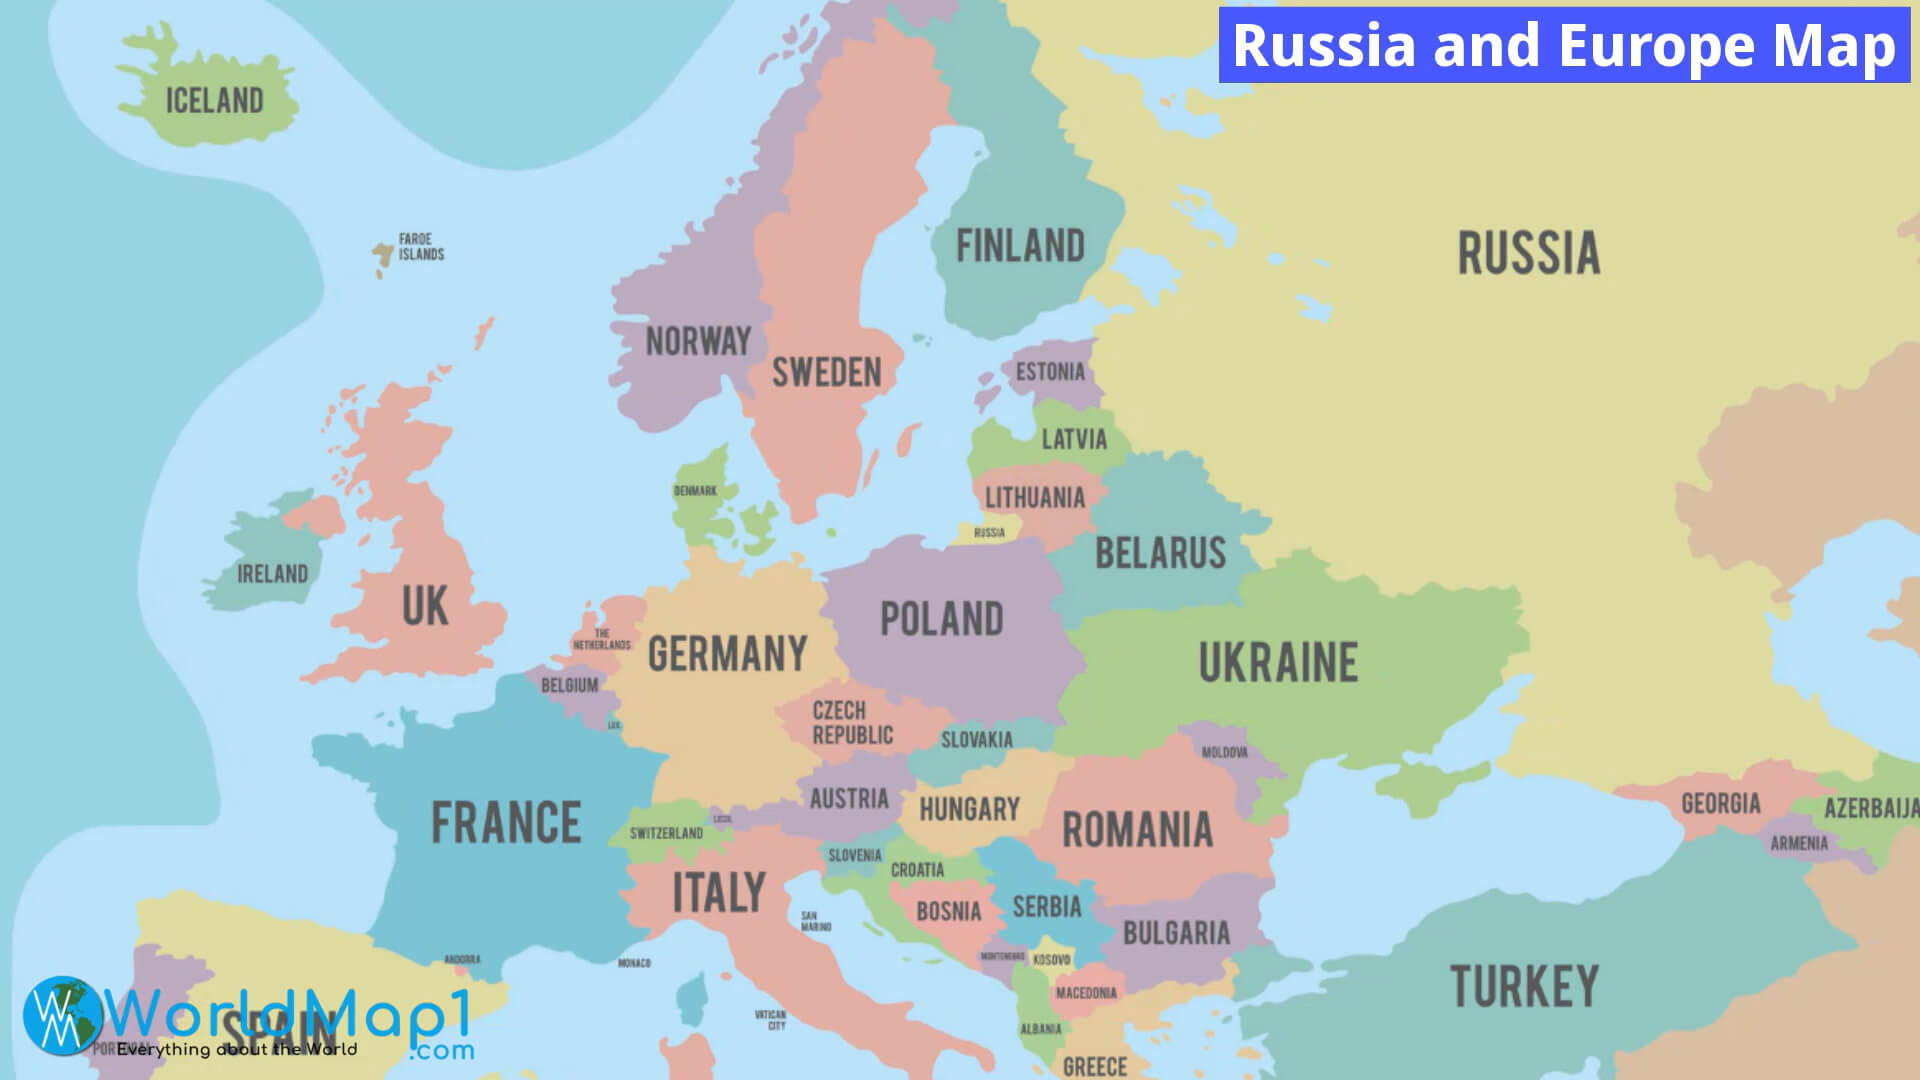 Russia and Europe Map